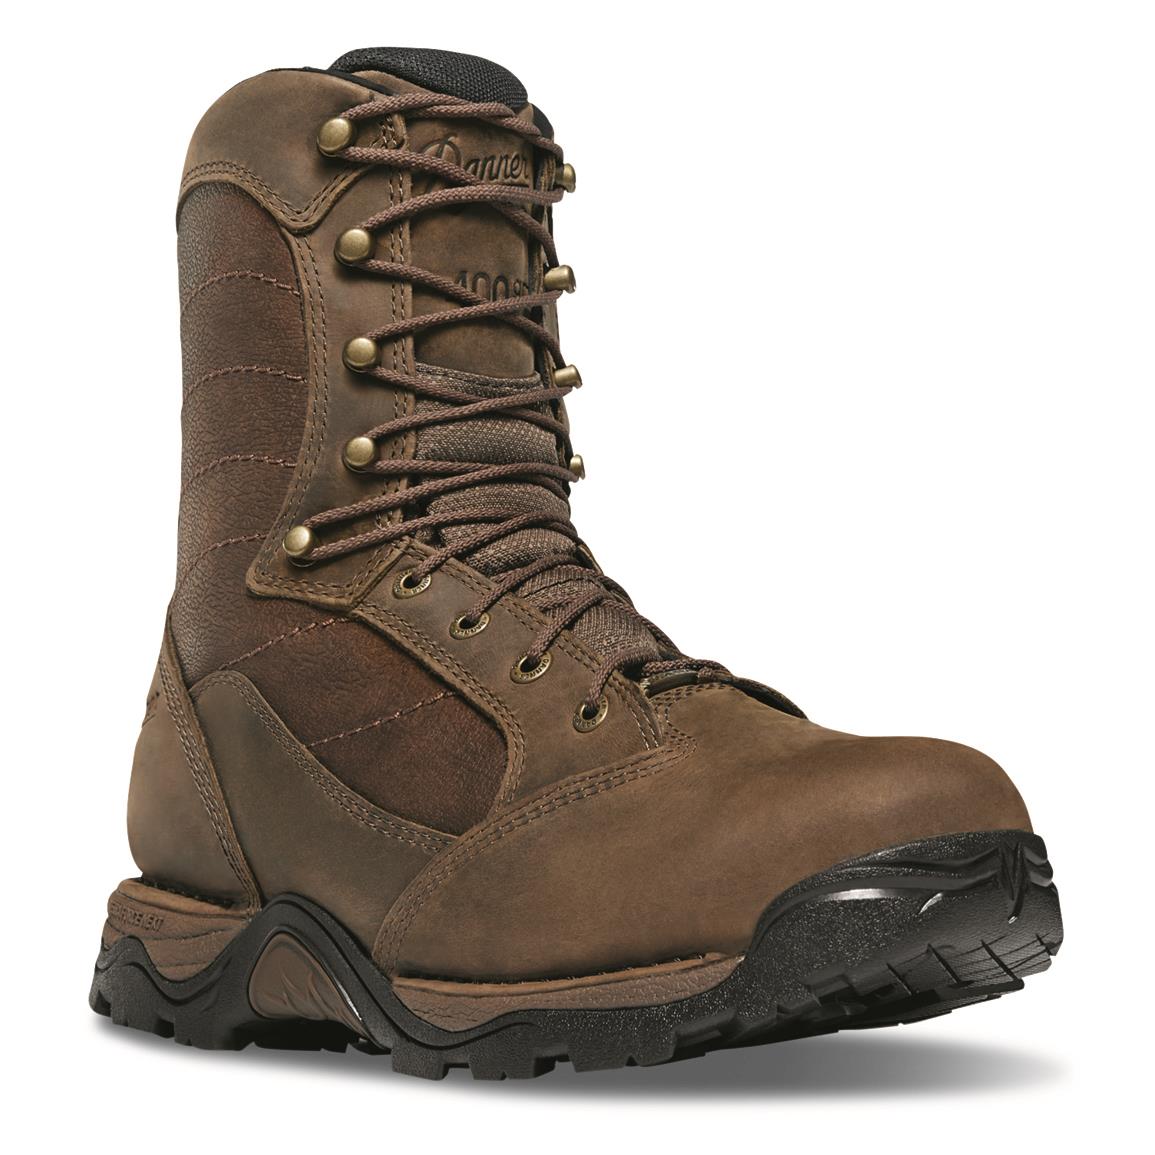 Danner Pronghorn All-Leather 8" GORE-TEX Waterproof Insulated Hunting Boots, 400 Gram, Brown